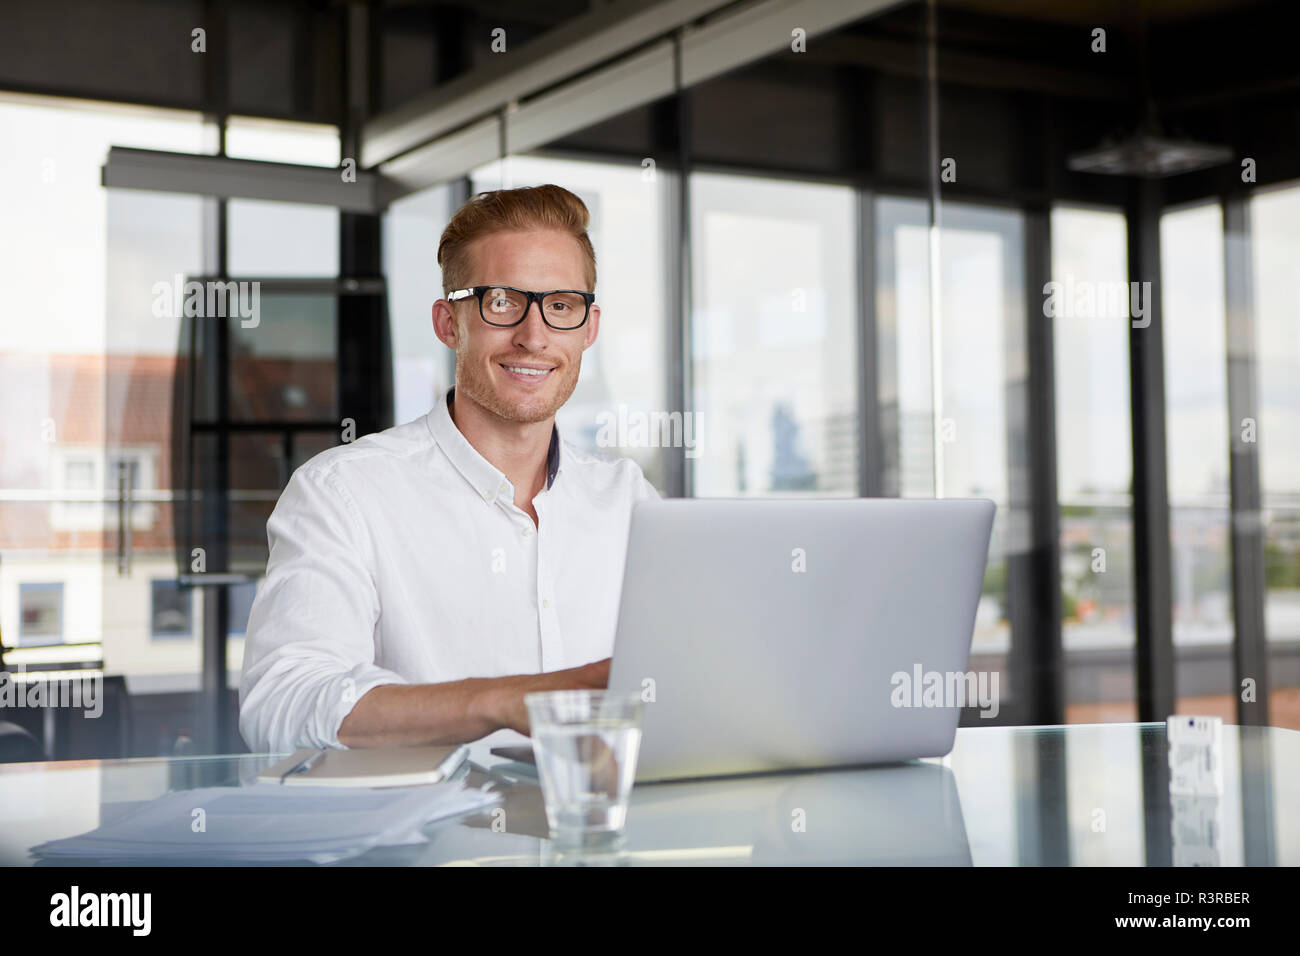 Portrait of smiling businessman using laptop on desk in office Stock Photo